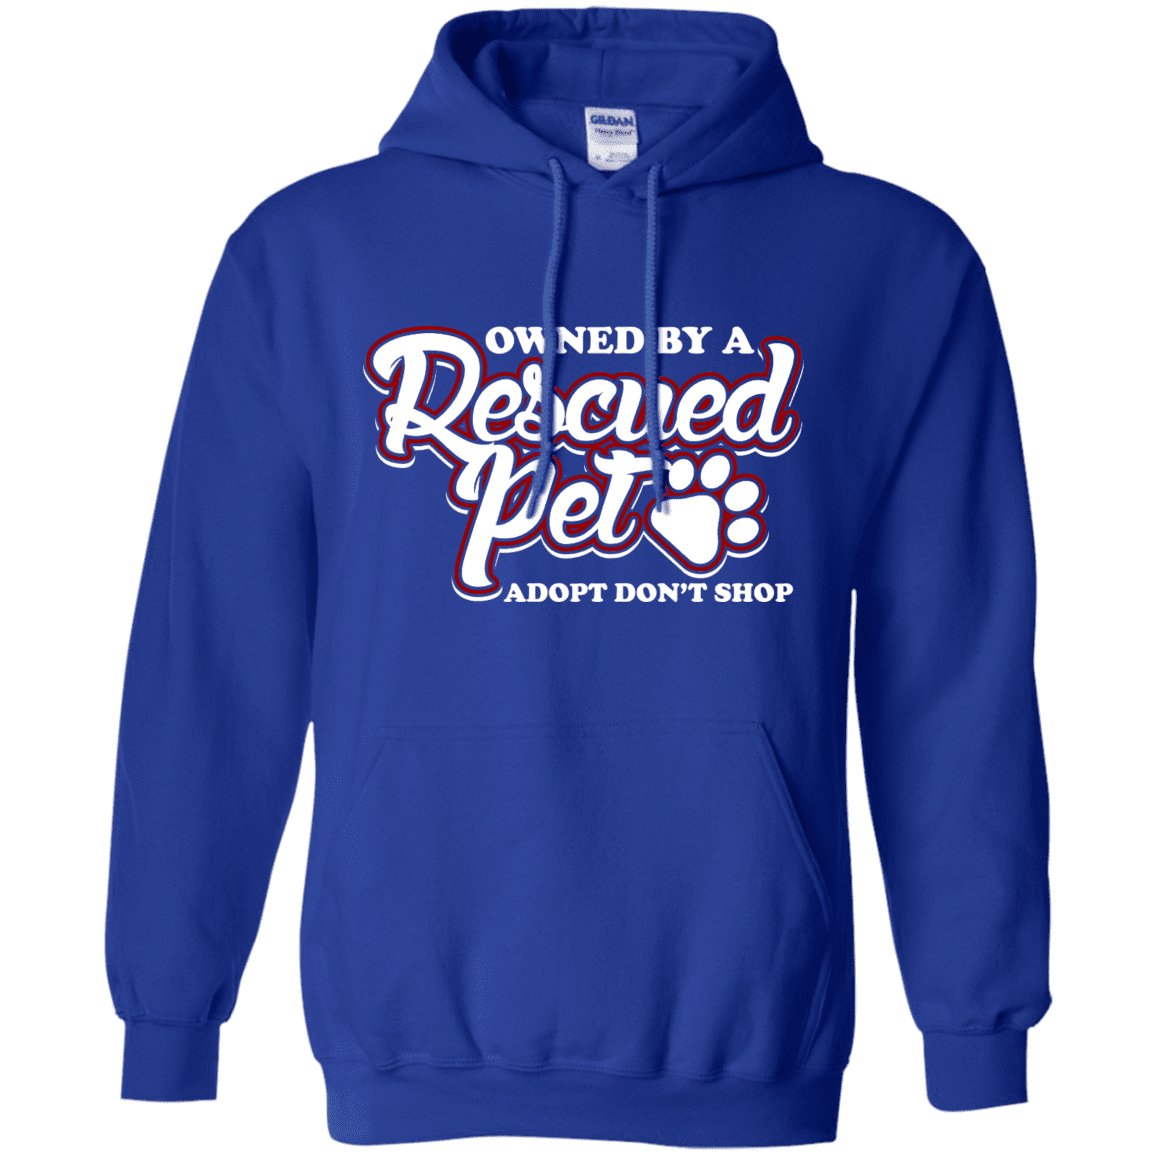 Owned By A Rescued Pet - Hoodie.